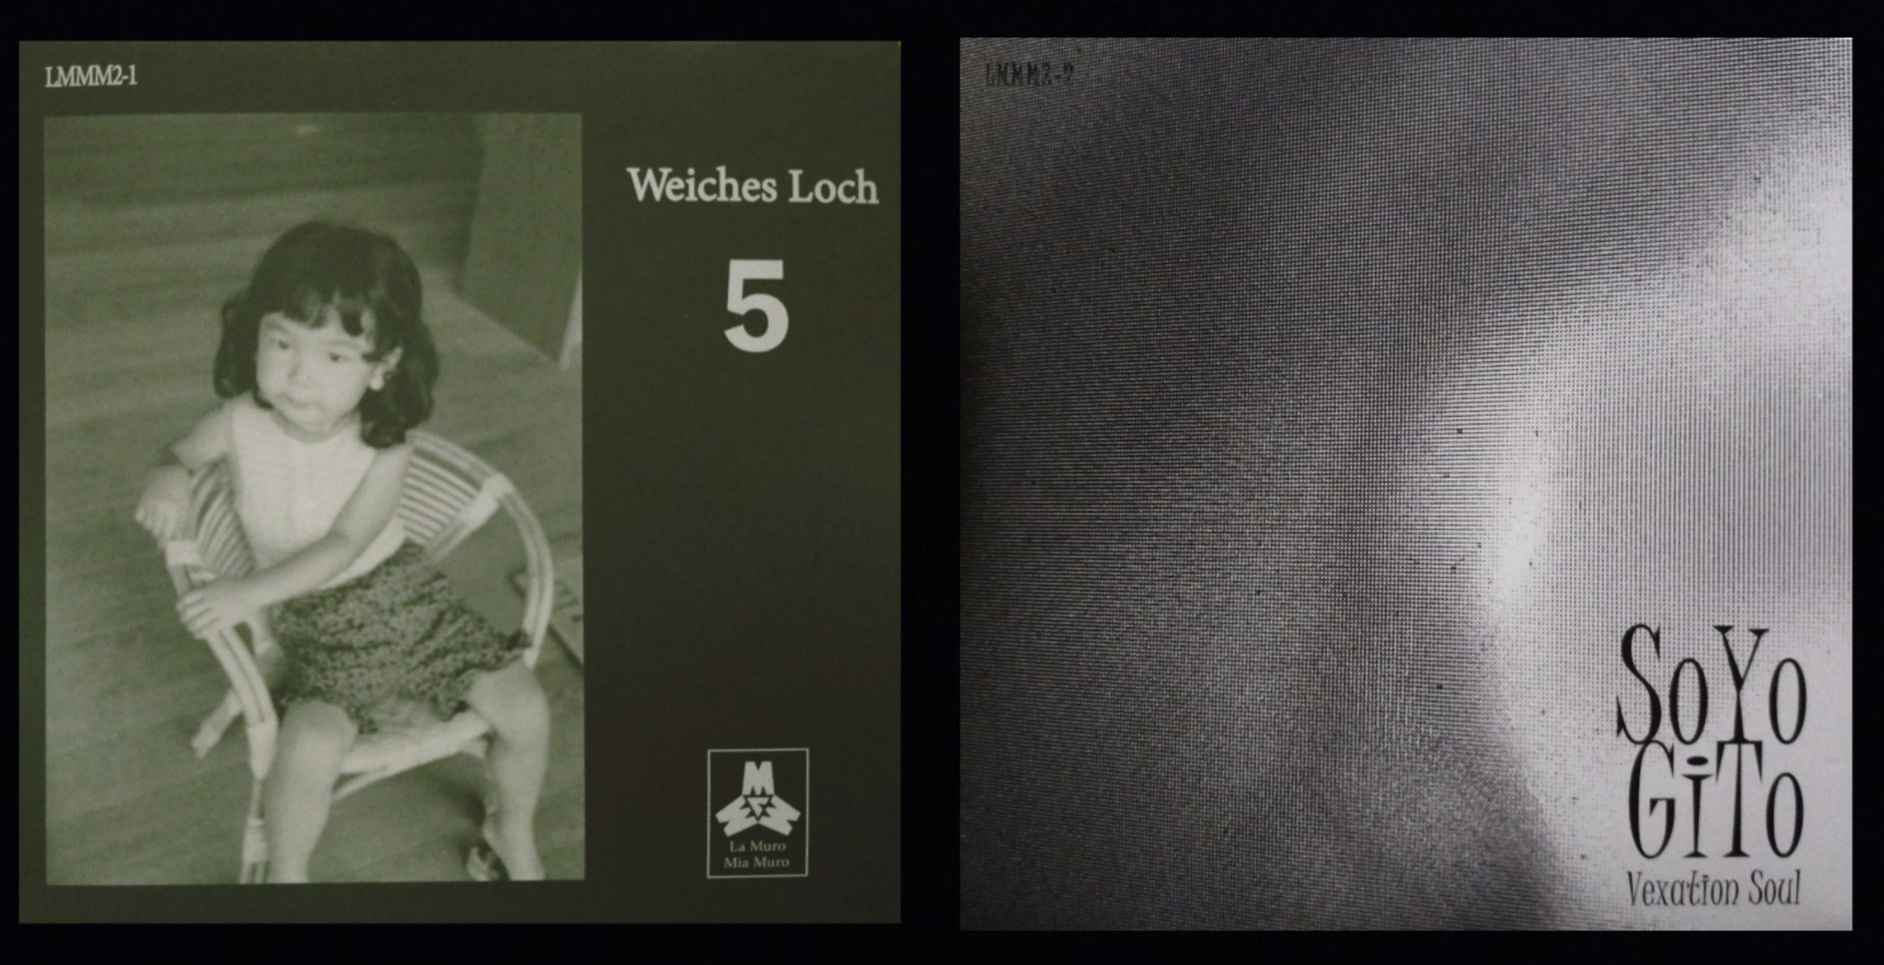 WEICHES LOCH / VEAXATION SOUL : 5 / SOYOGITO - ウインドウを閉じる